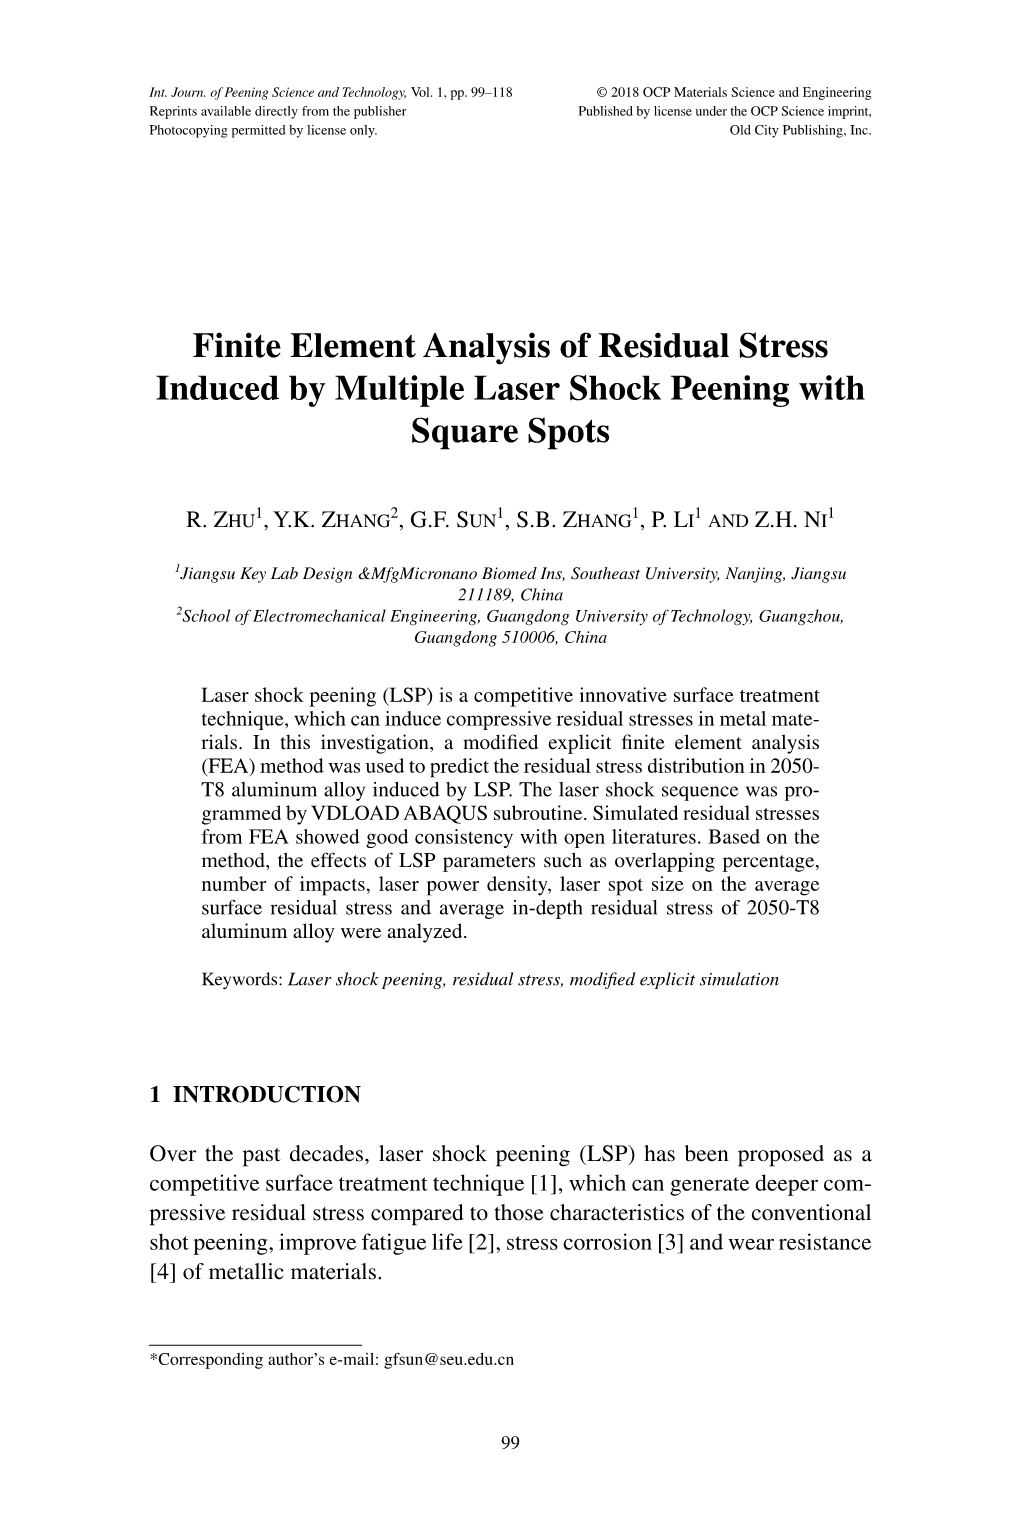 Finite Element Analysis of Residual Stress Induced by Multiple Laser Shock Peening with Square Spots